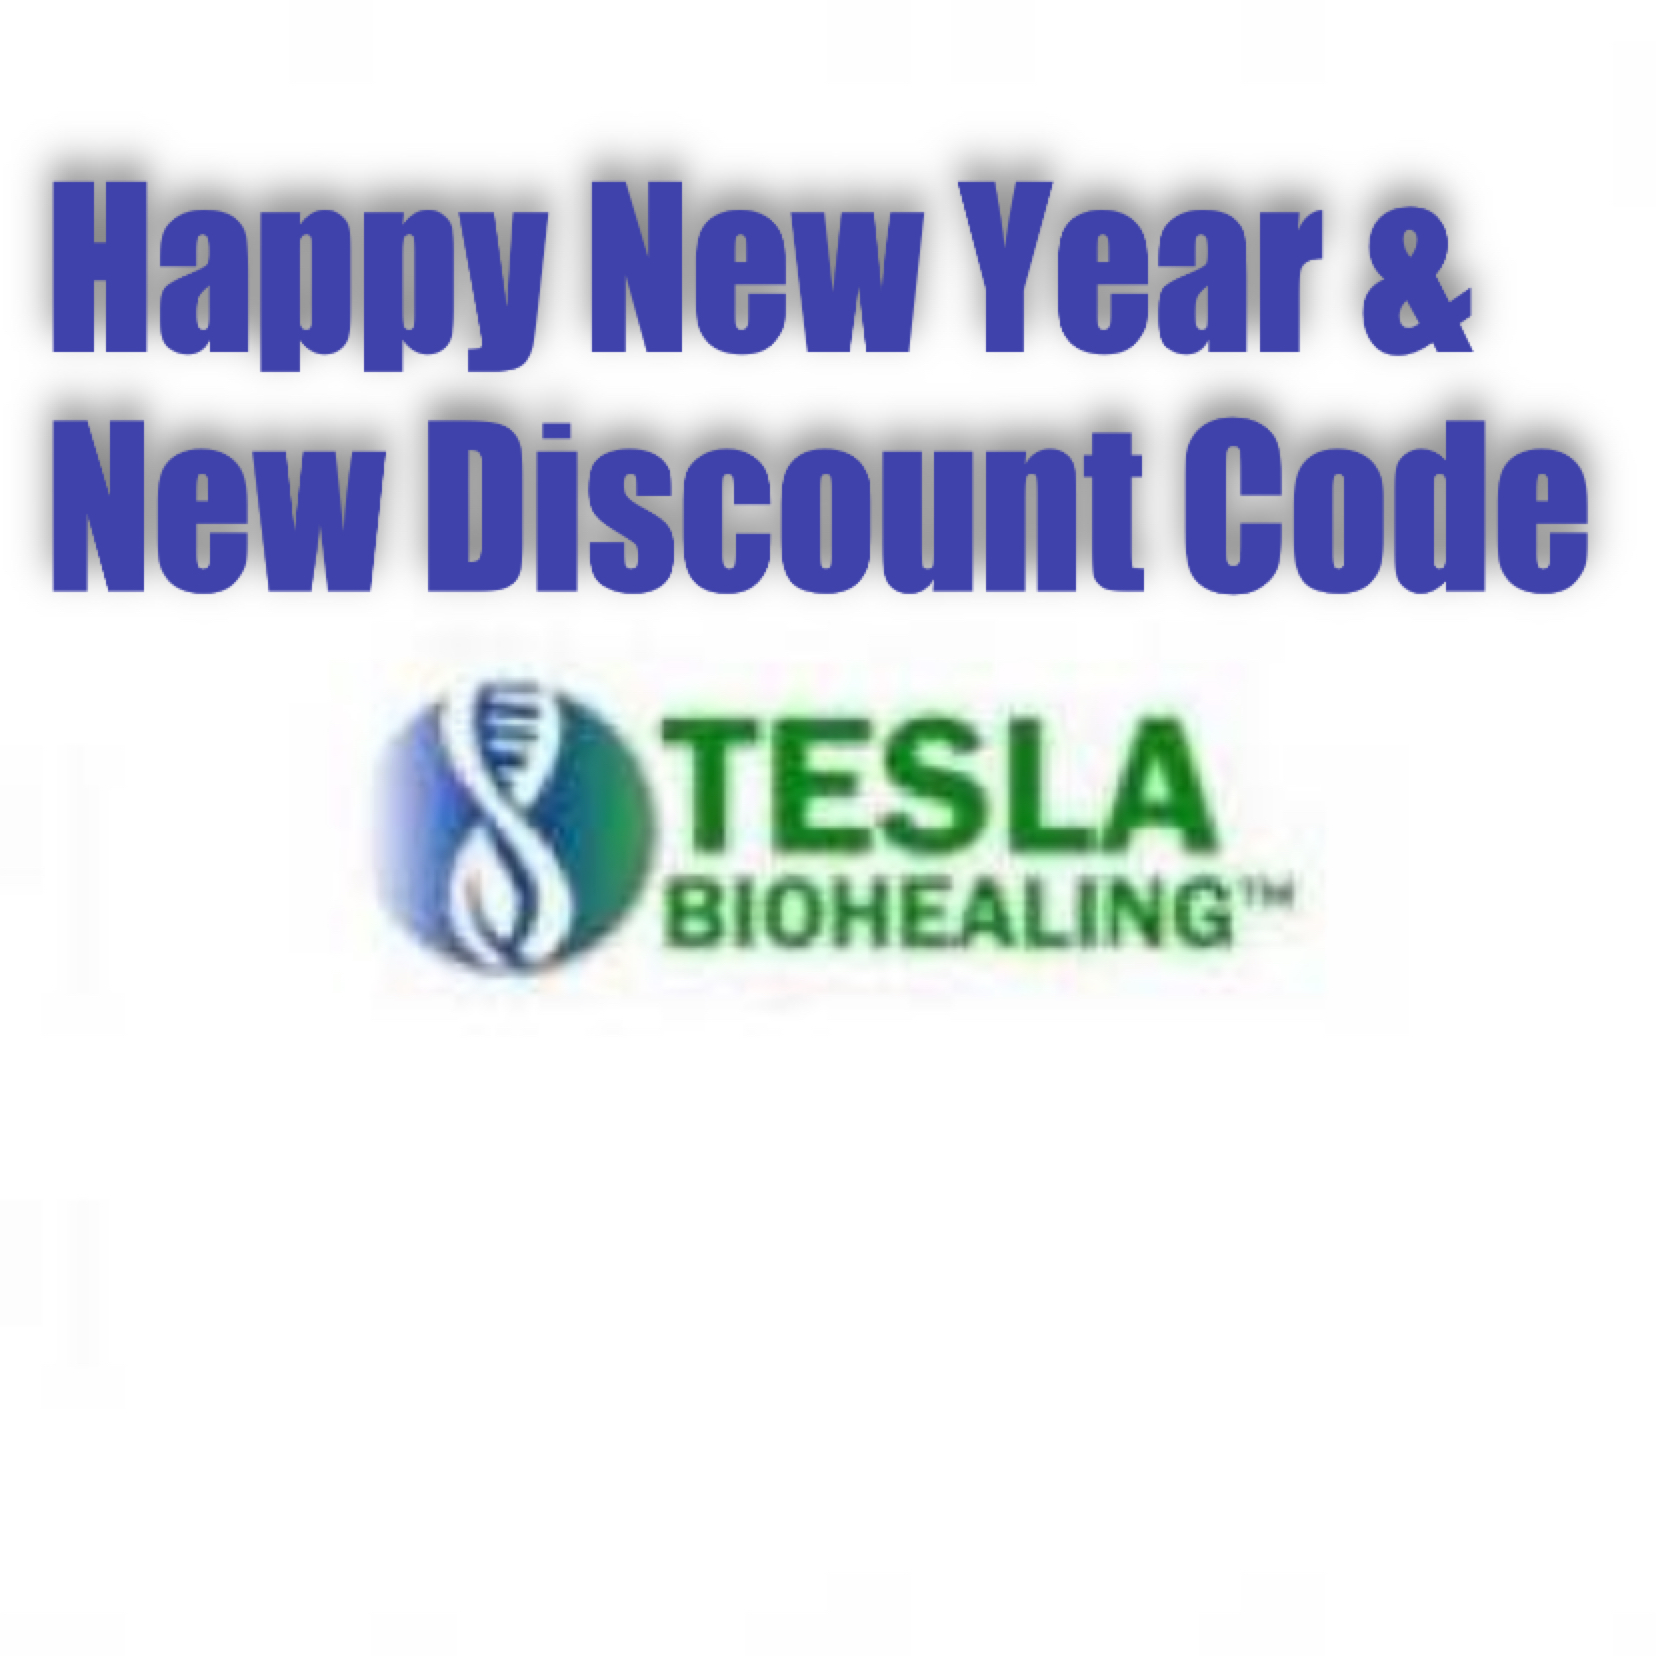 Happy New Year Message, Updates & New Discount Code for Tesla